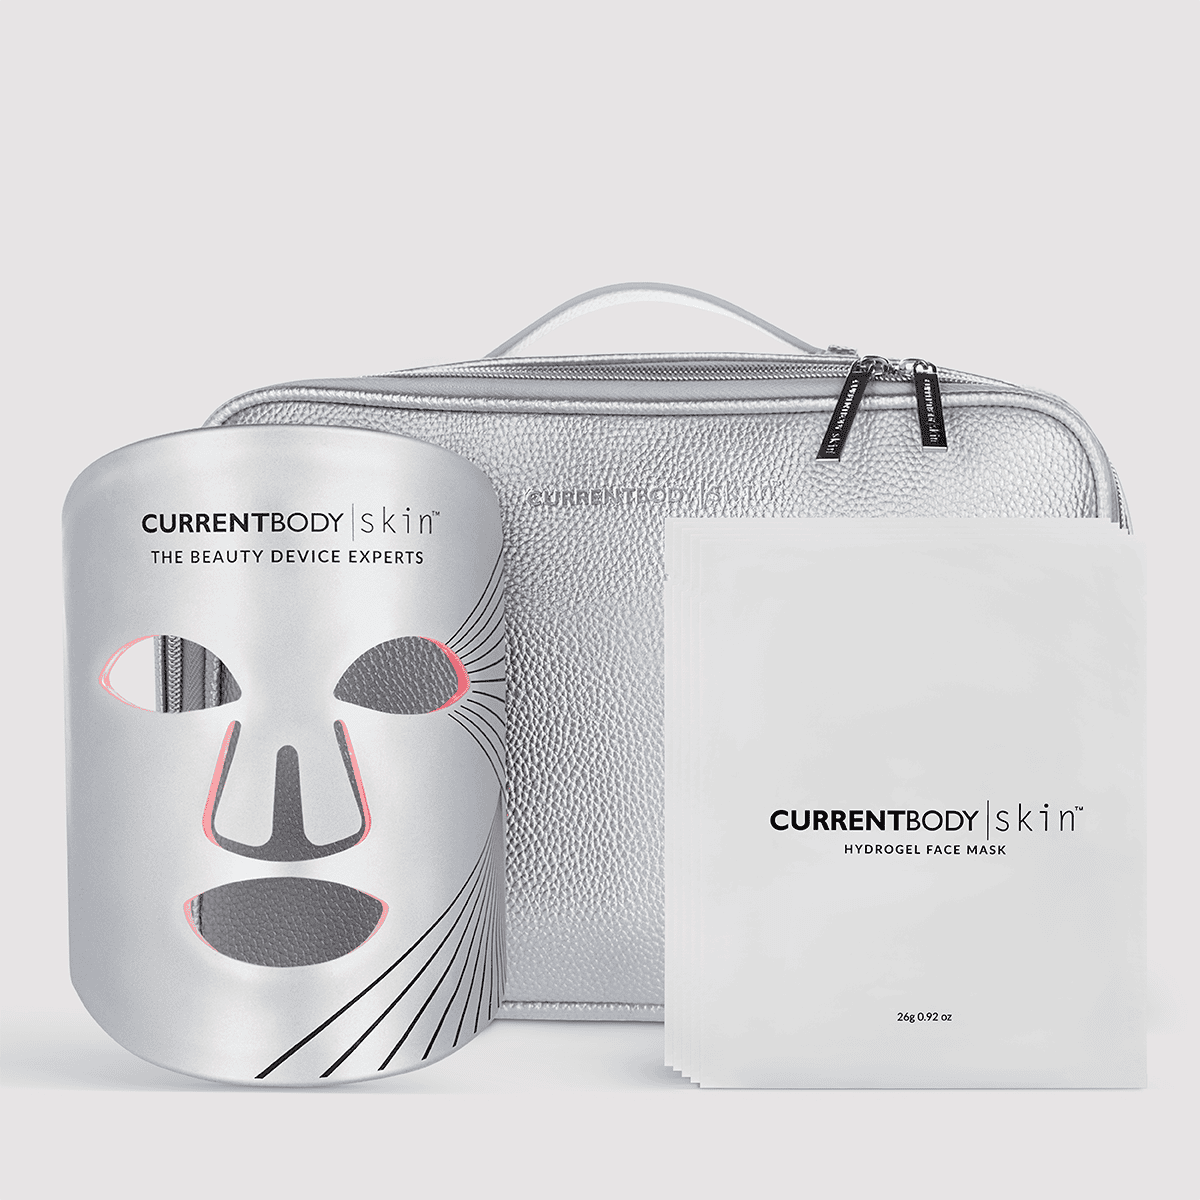 CurrentBody Skin LED Mother's Day Beauty Gift Set - Silver Mask